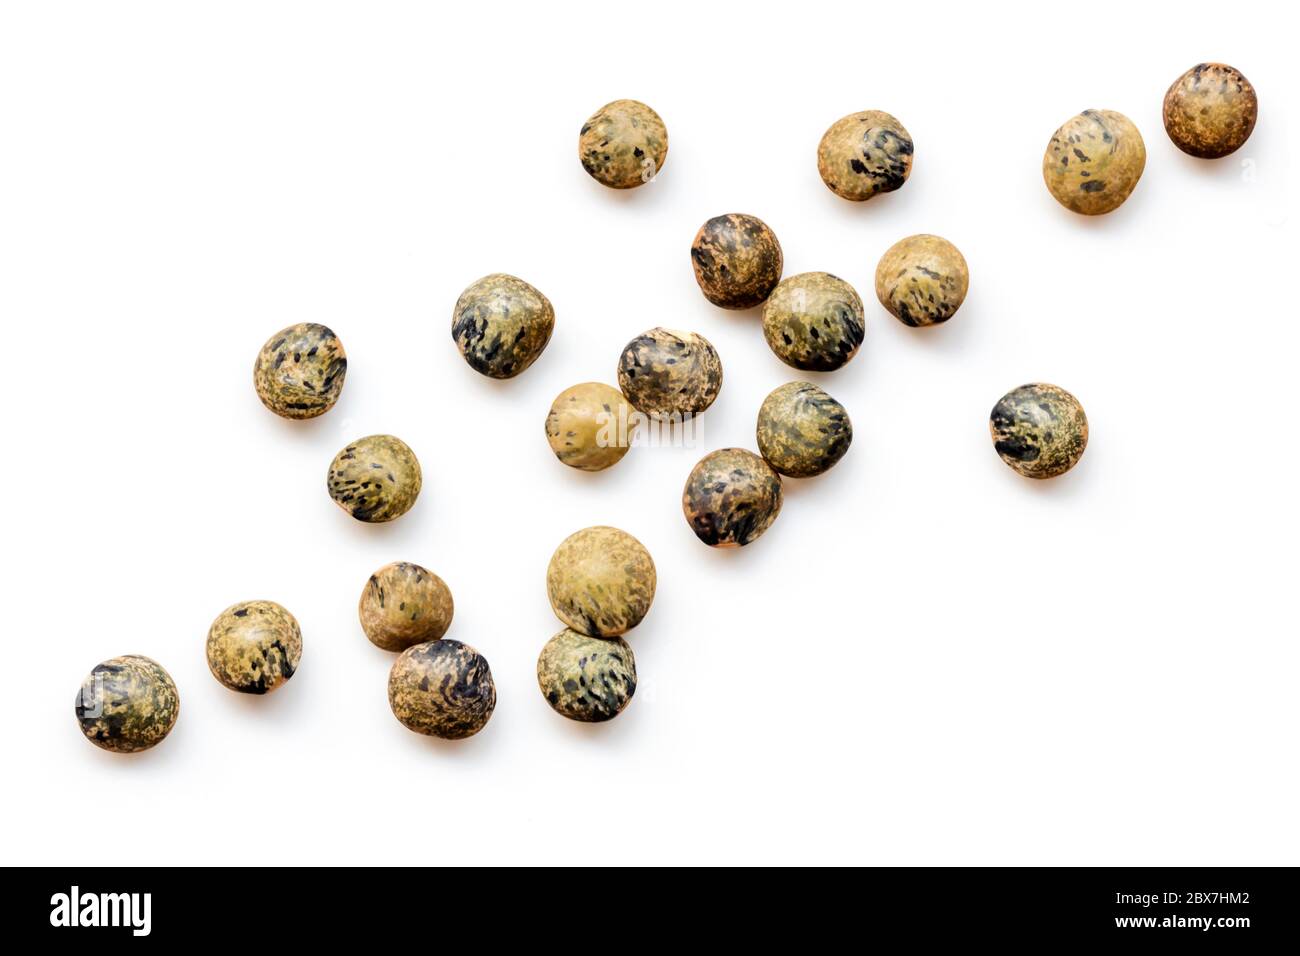 French green or le puy lentils scattered.  Isolated on white, top view. Stock Photo